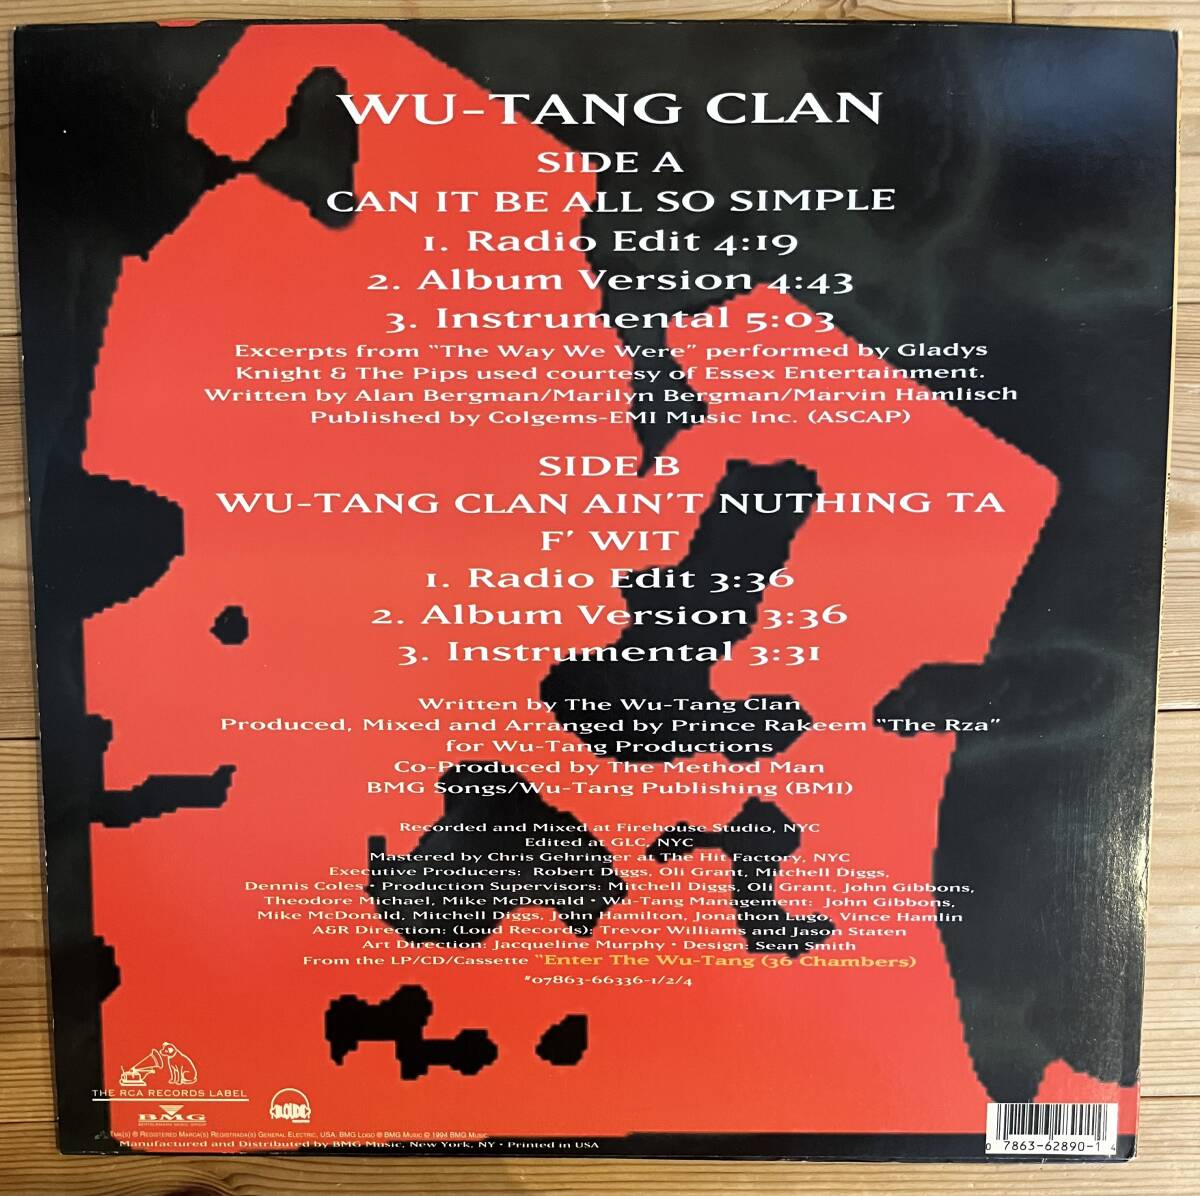 WU-TANG CLAN / CAN IT BE ALL SO SIMPLE①の画像2